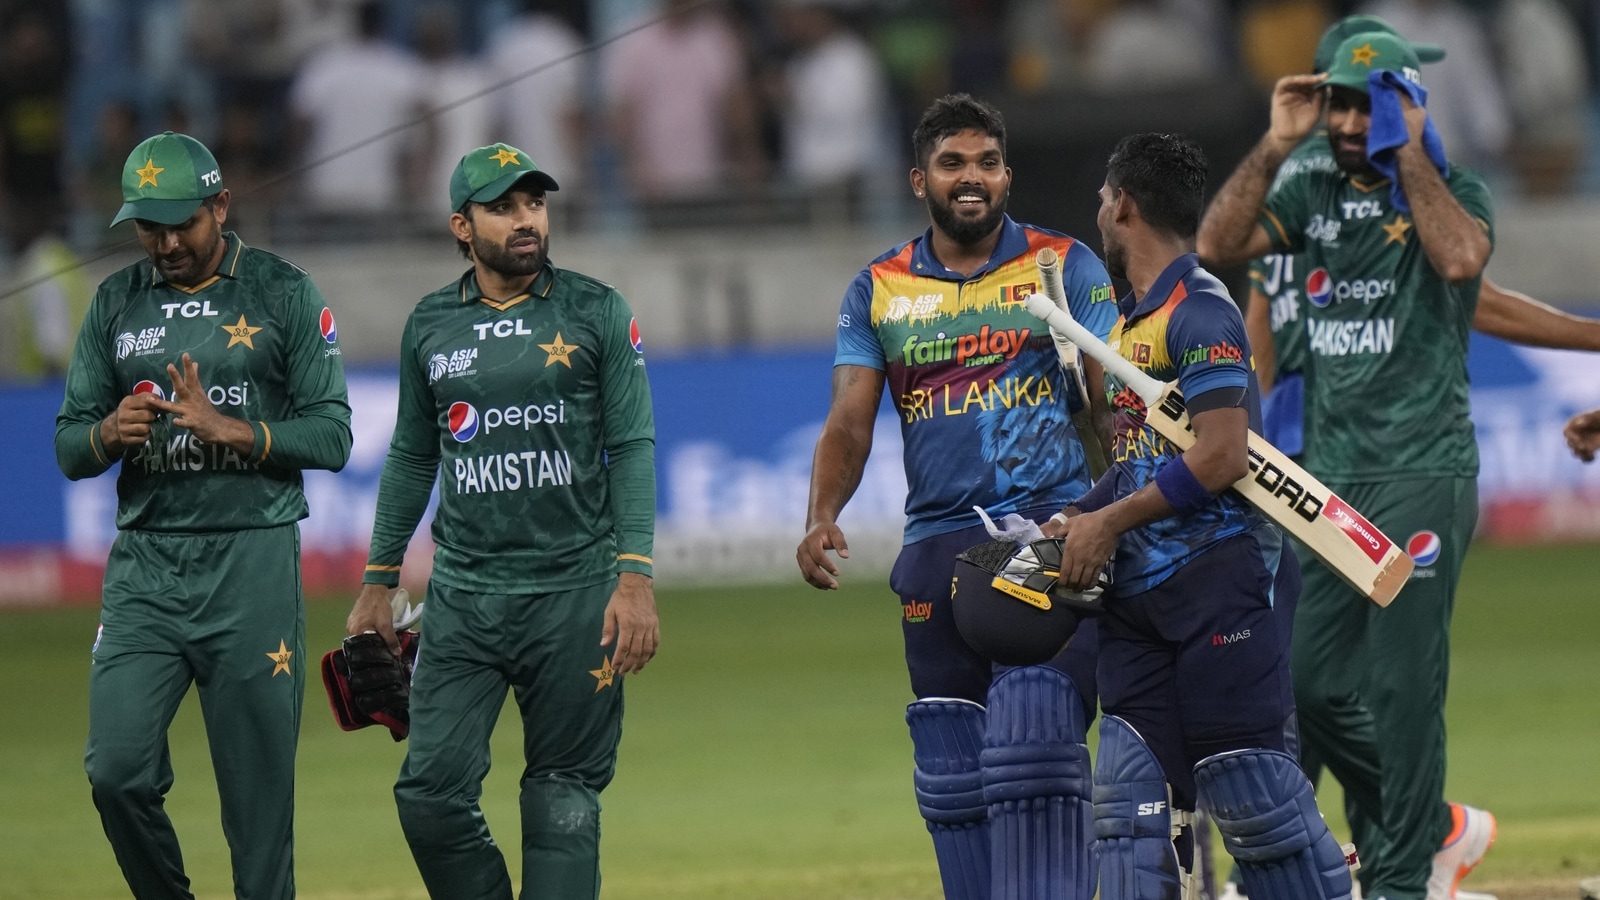 SL vs PAK T20 Live Streaming Asia Cup 2022 Final When and Where to watch Cricket